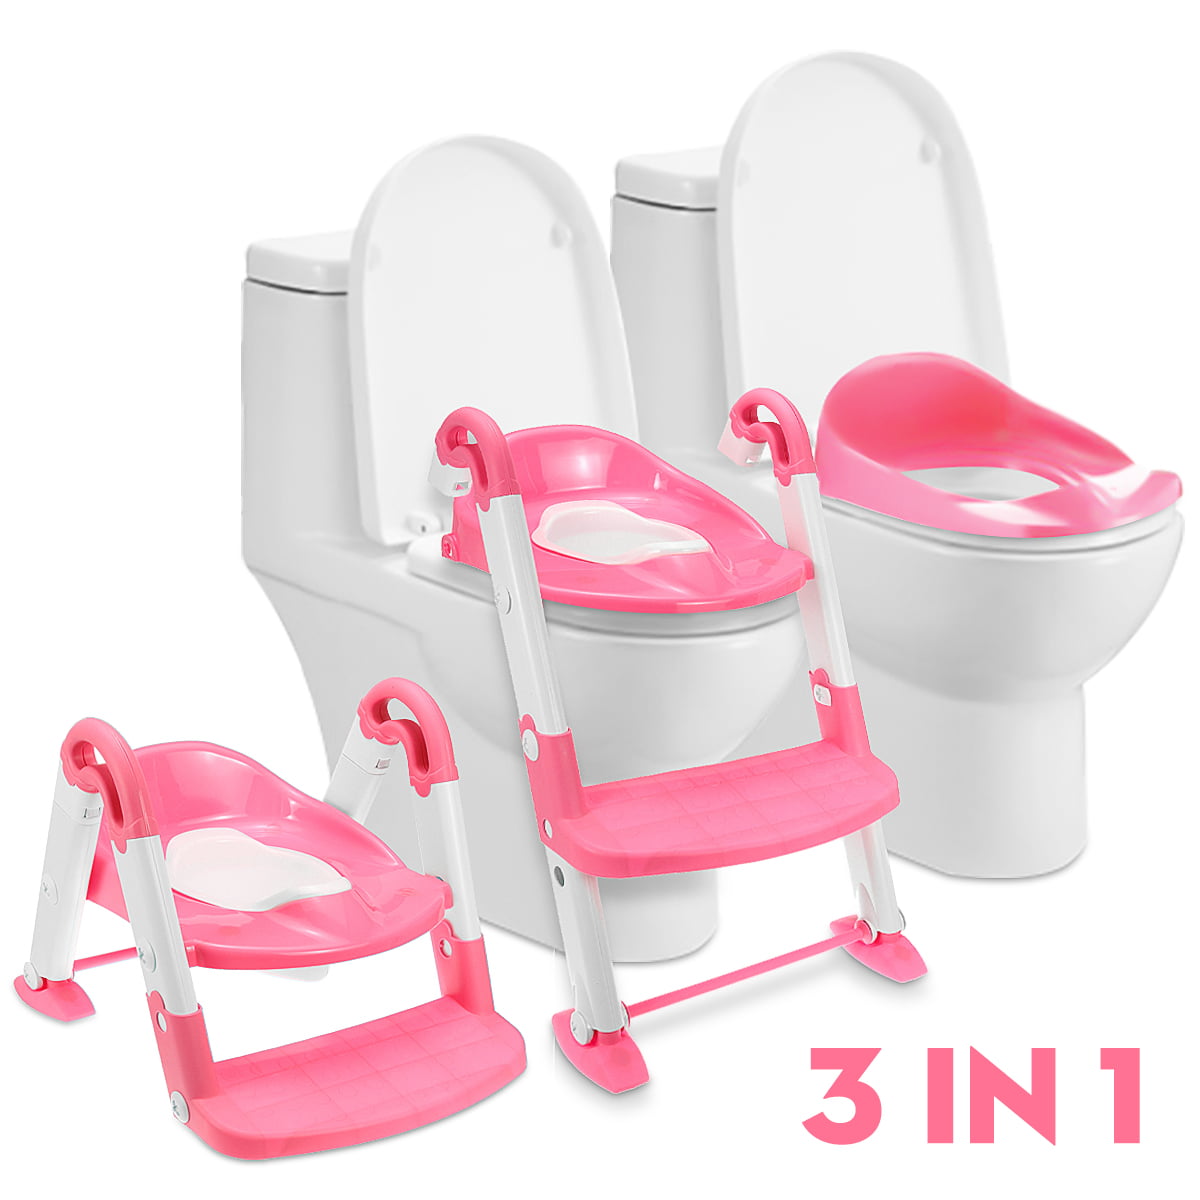 3-in-1 Baby Potty Chair Toddler Children Kids Training Toilet Seat Portable Pink 